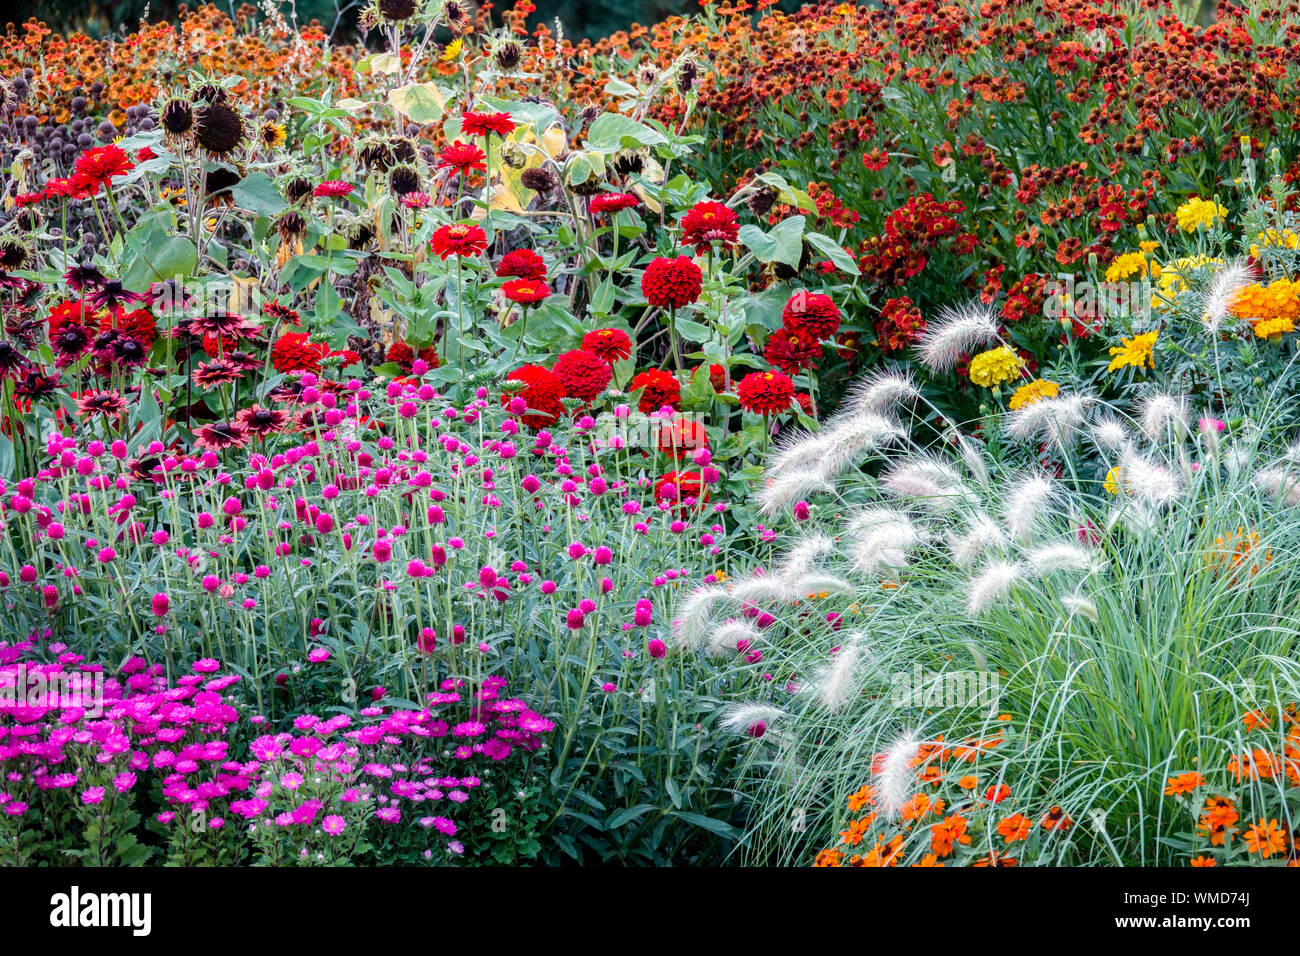 Beautiful flower garden Flowers Perennial Annual Plants Colourful Flower bed Border Cottage Garden Flowerbed August Colorful Mixed Bed Mix Scene Stock Photo